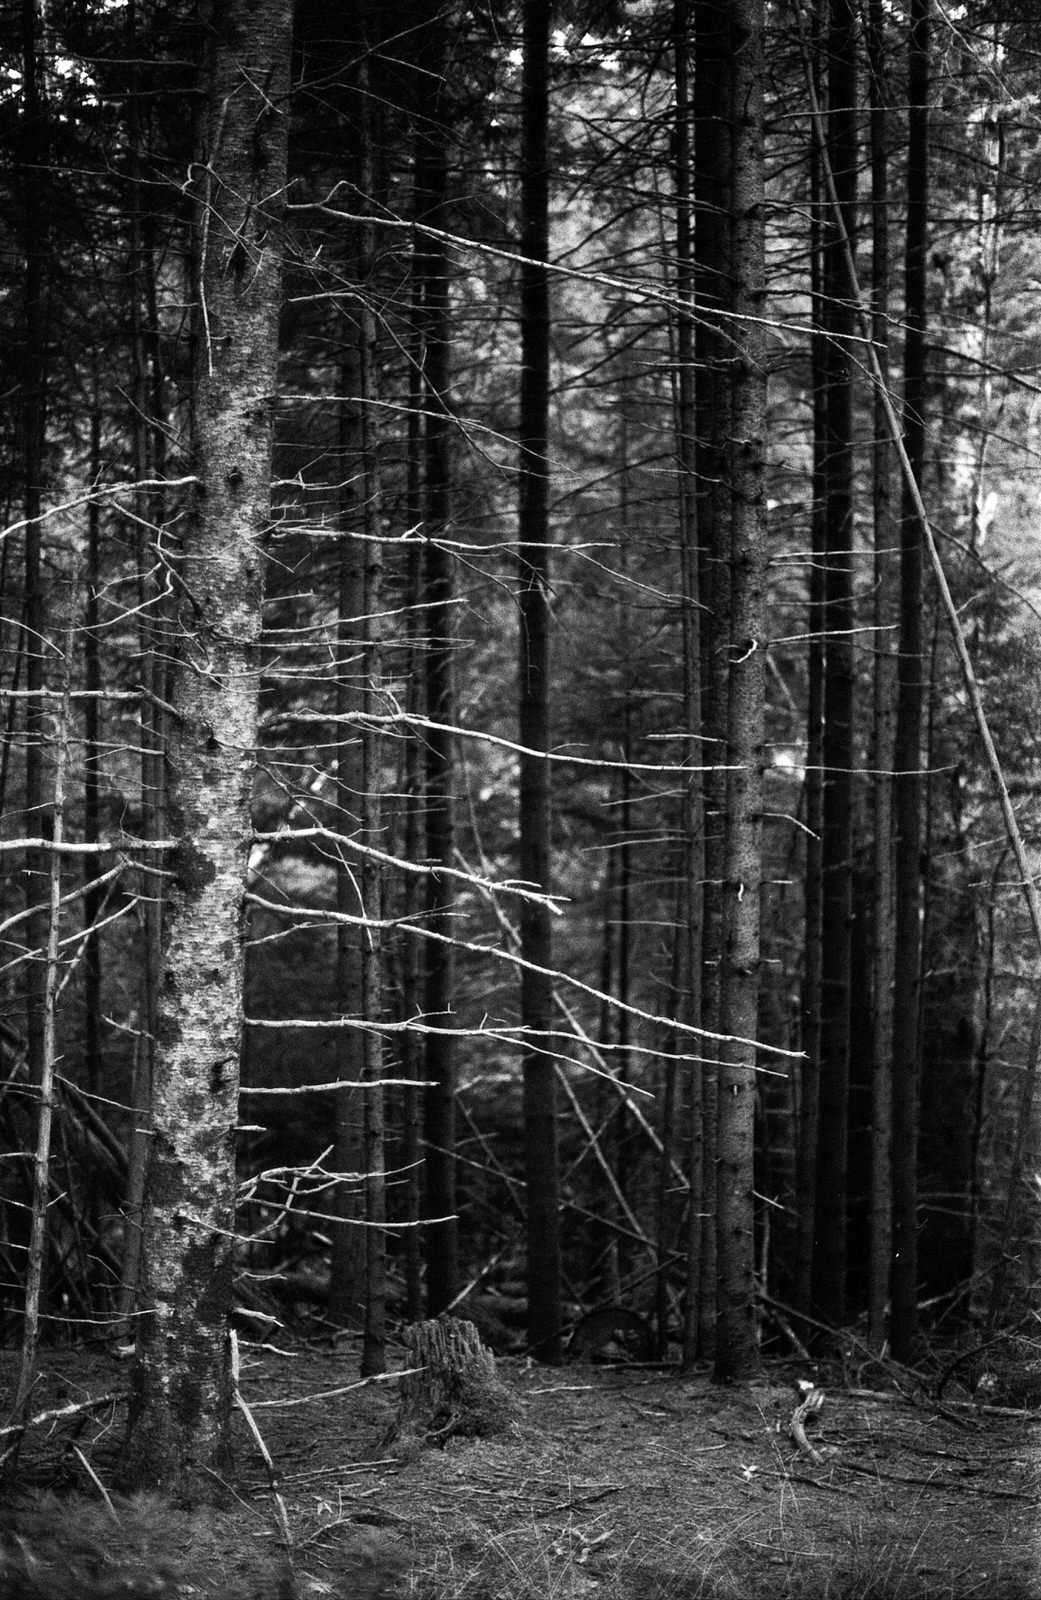 One of my favorite images from the trip. One strip of light in a dense dark forest.